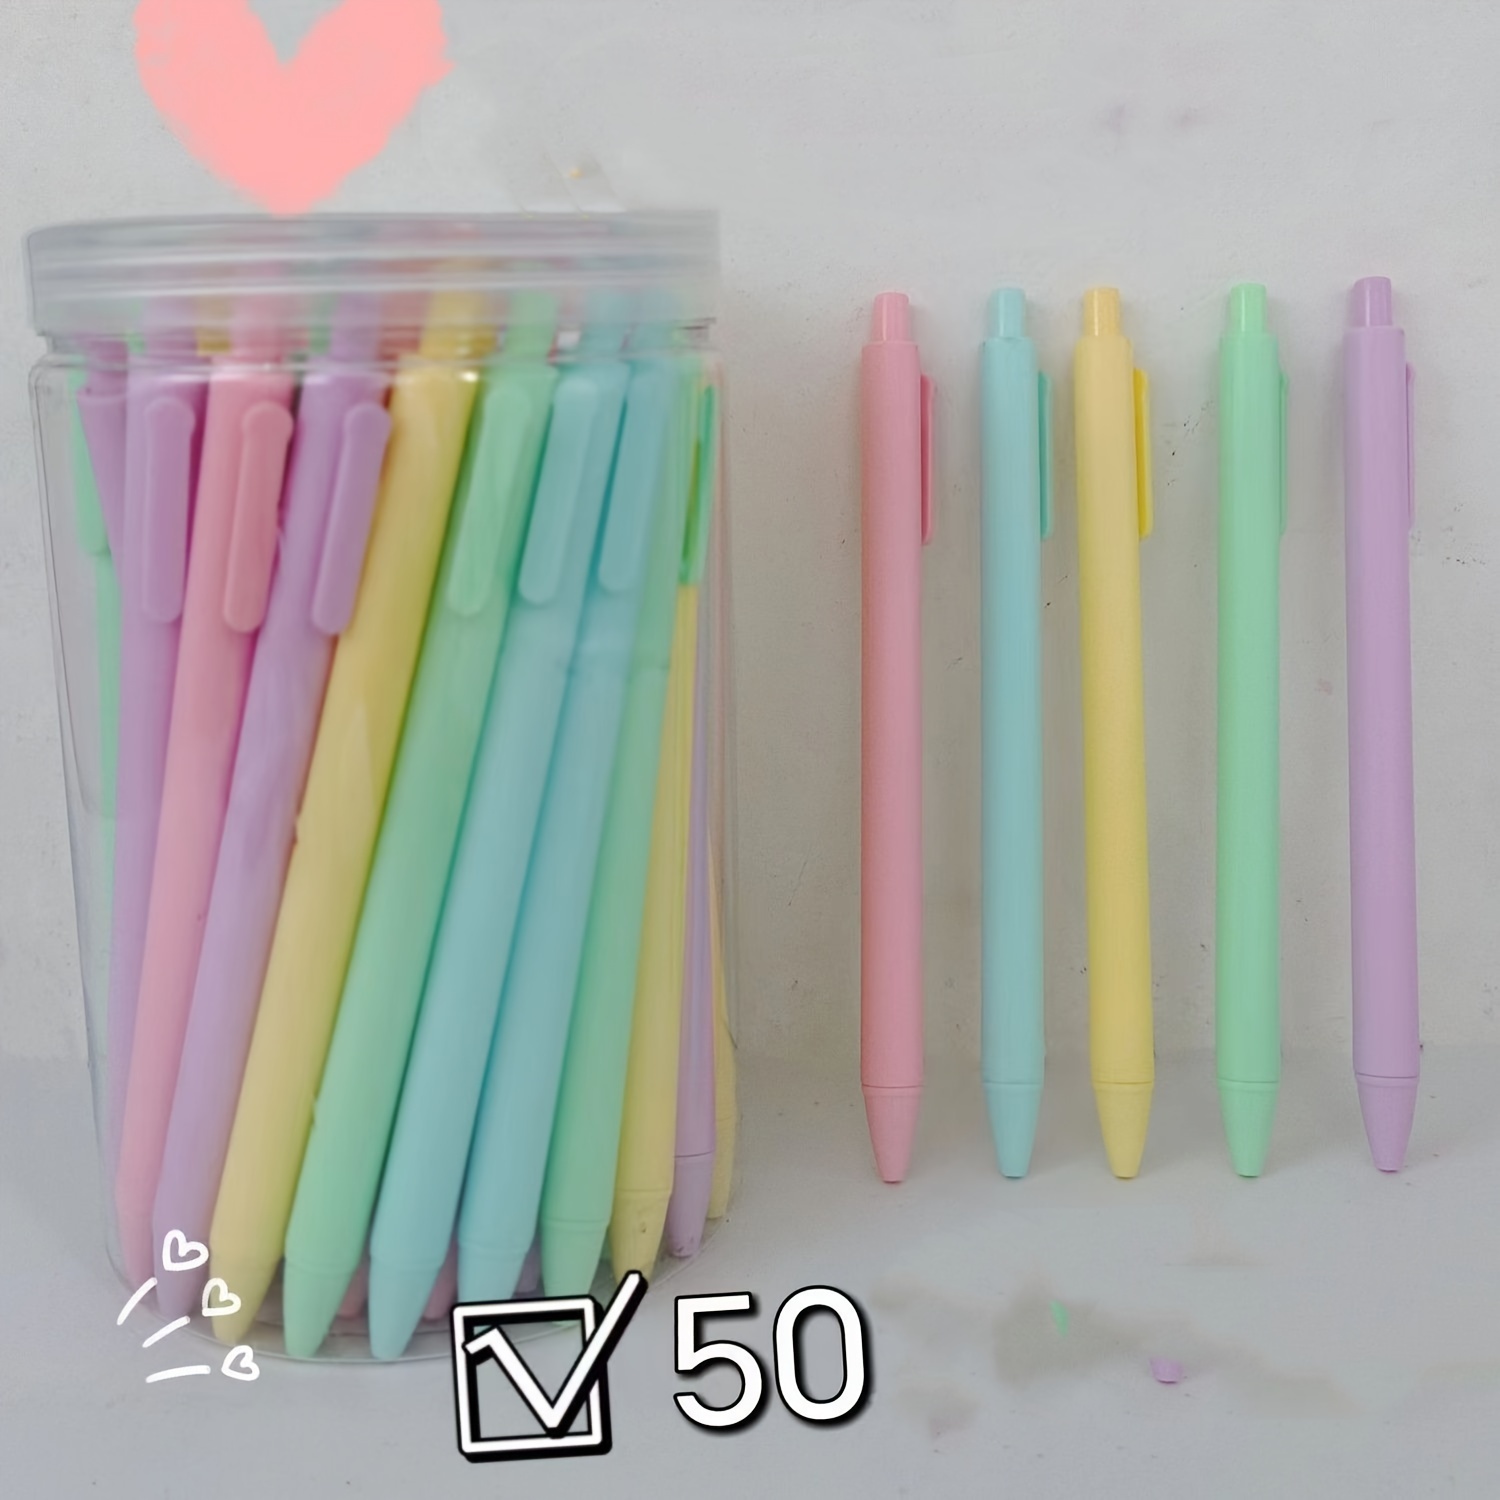 

Pack Of 50 Macaron Gel Rollerball Pens - Quick Drying Plastic Medium Point Pens For Students And Office Stationery